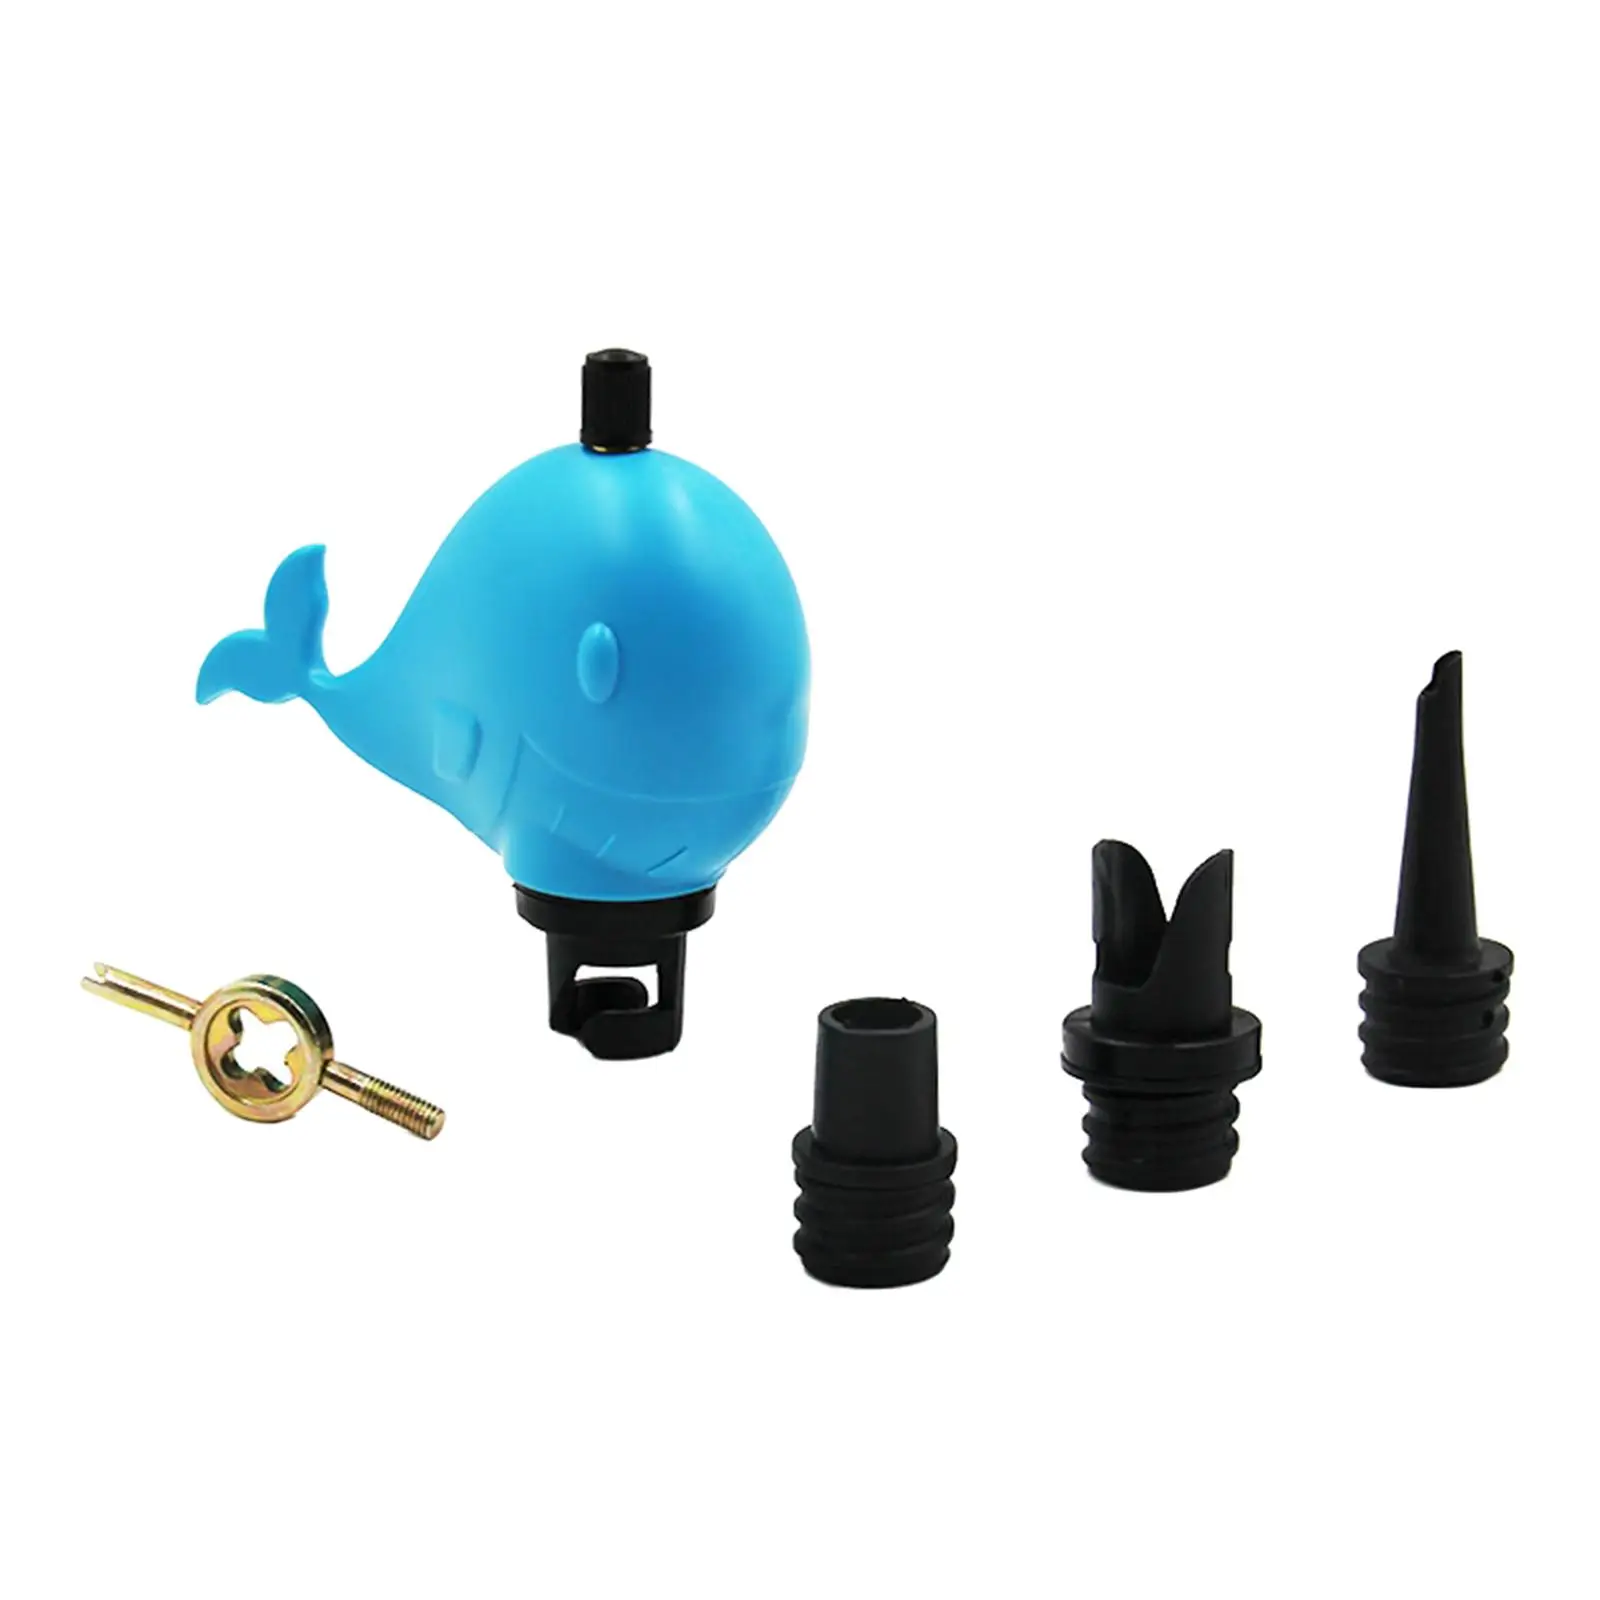 Valves Adapter Durable Adapter Inflatable Boat Pump Adaptor Boat Pump Adaptor for Kayak Canoe Paddle Board Raft Attachments